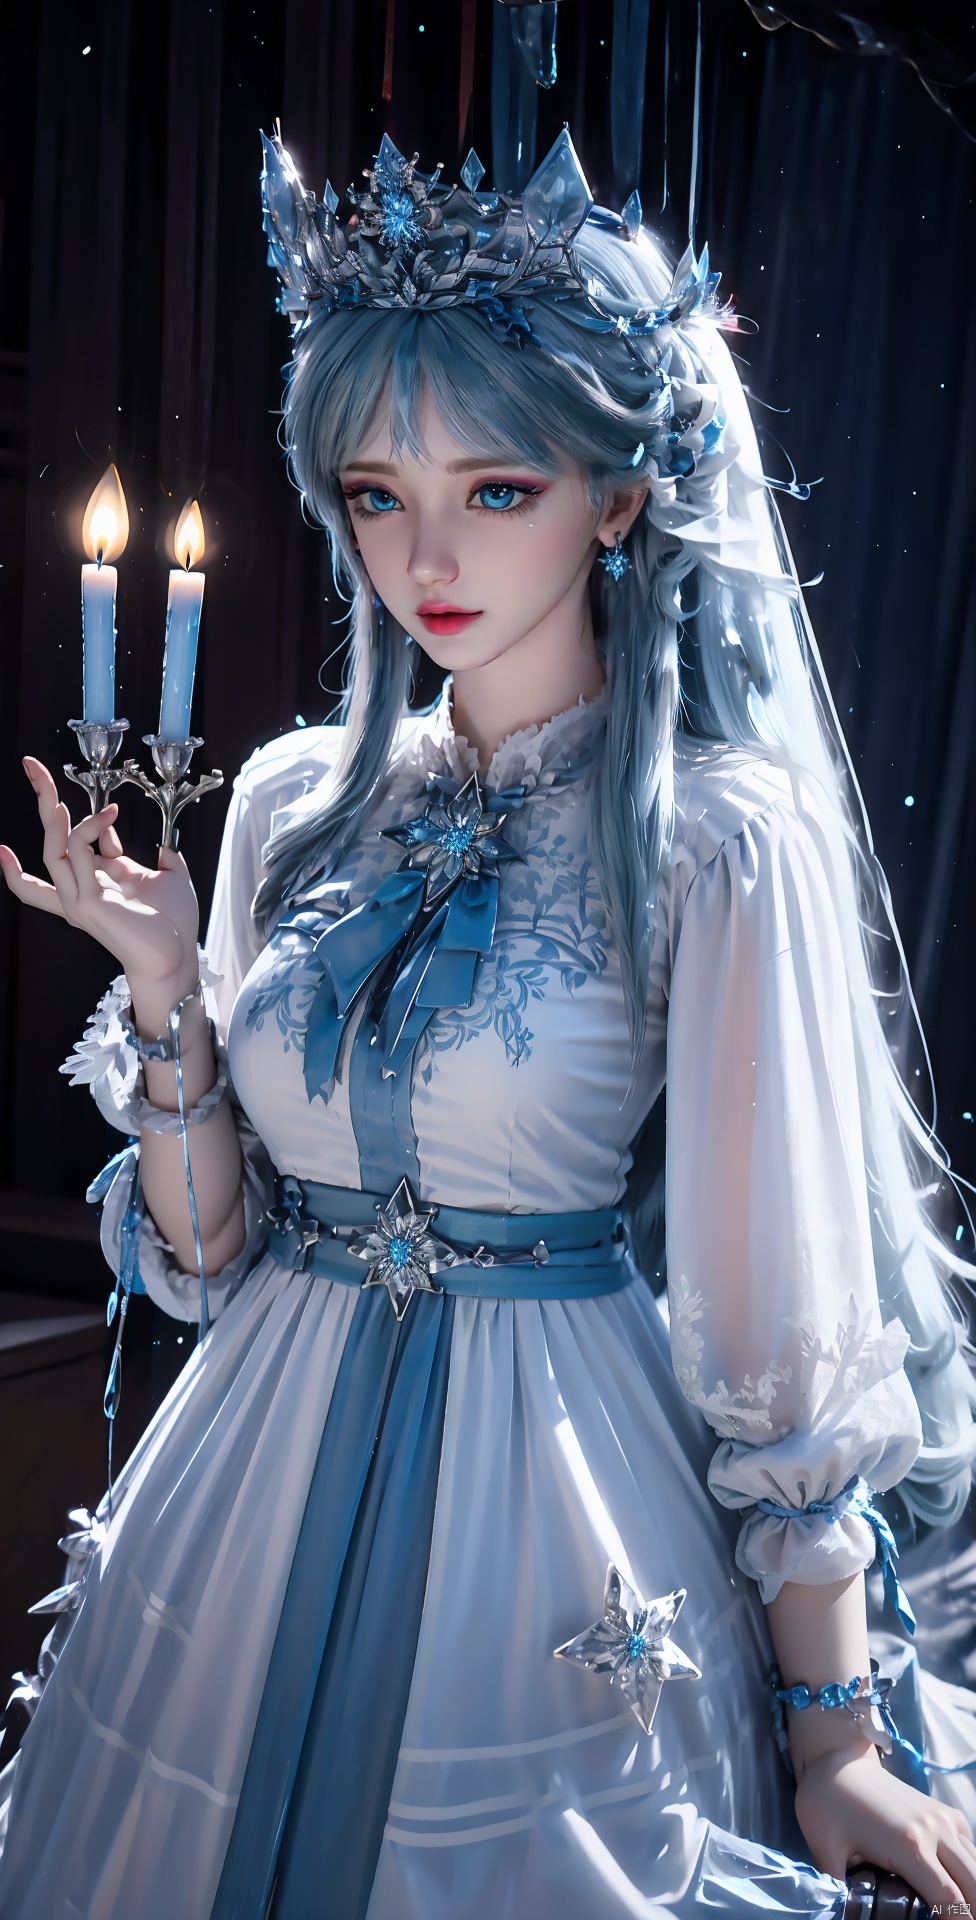 blue hair blue hair,full body
, 1 girl, solo, long hair, blue eyes, dress, jewelry, very long hair, indoor, white dress, bracelets, crown, candles, snowflakes,
simple background, blur, blue background, gems, ice, blue theme, crystal,